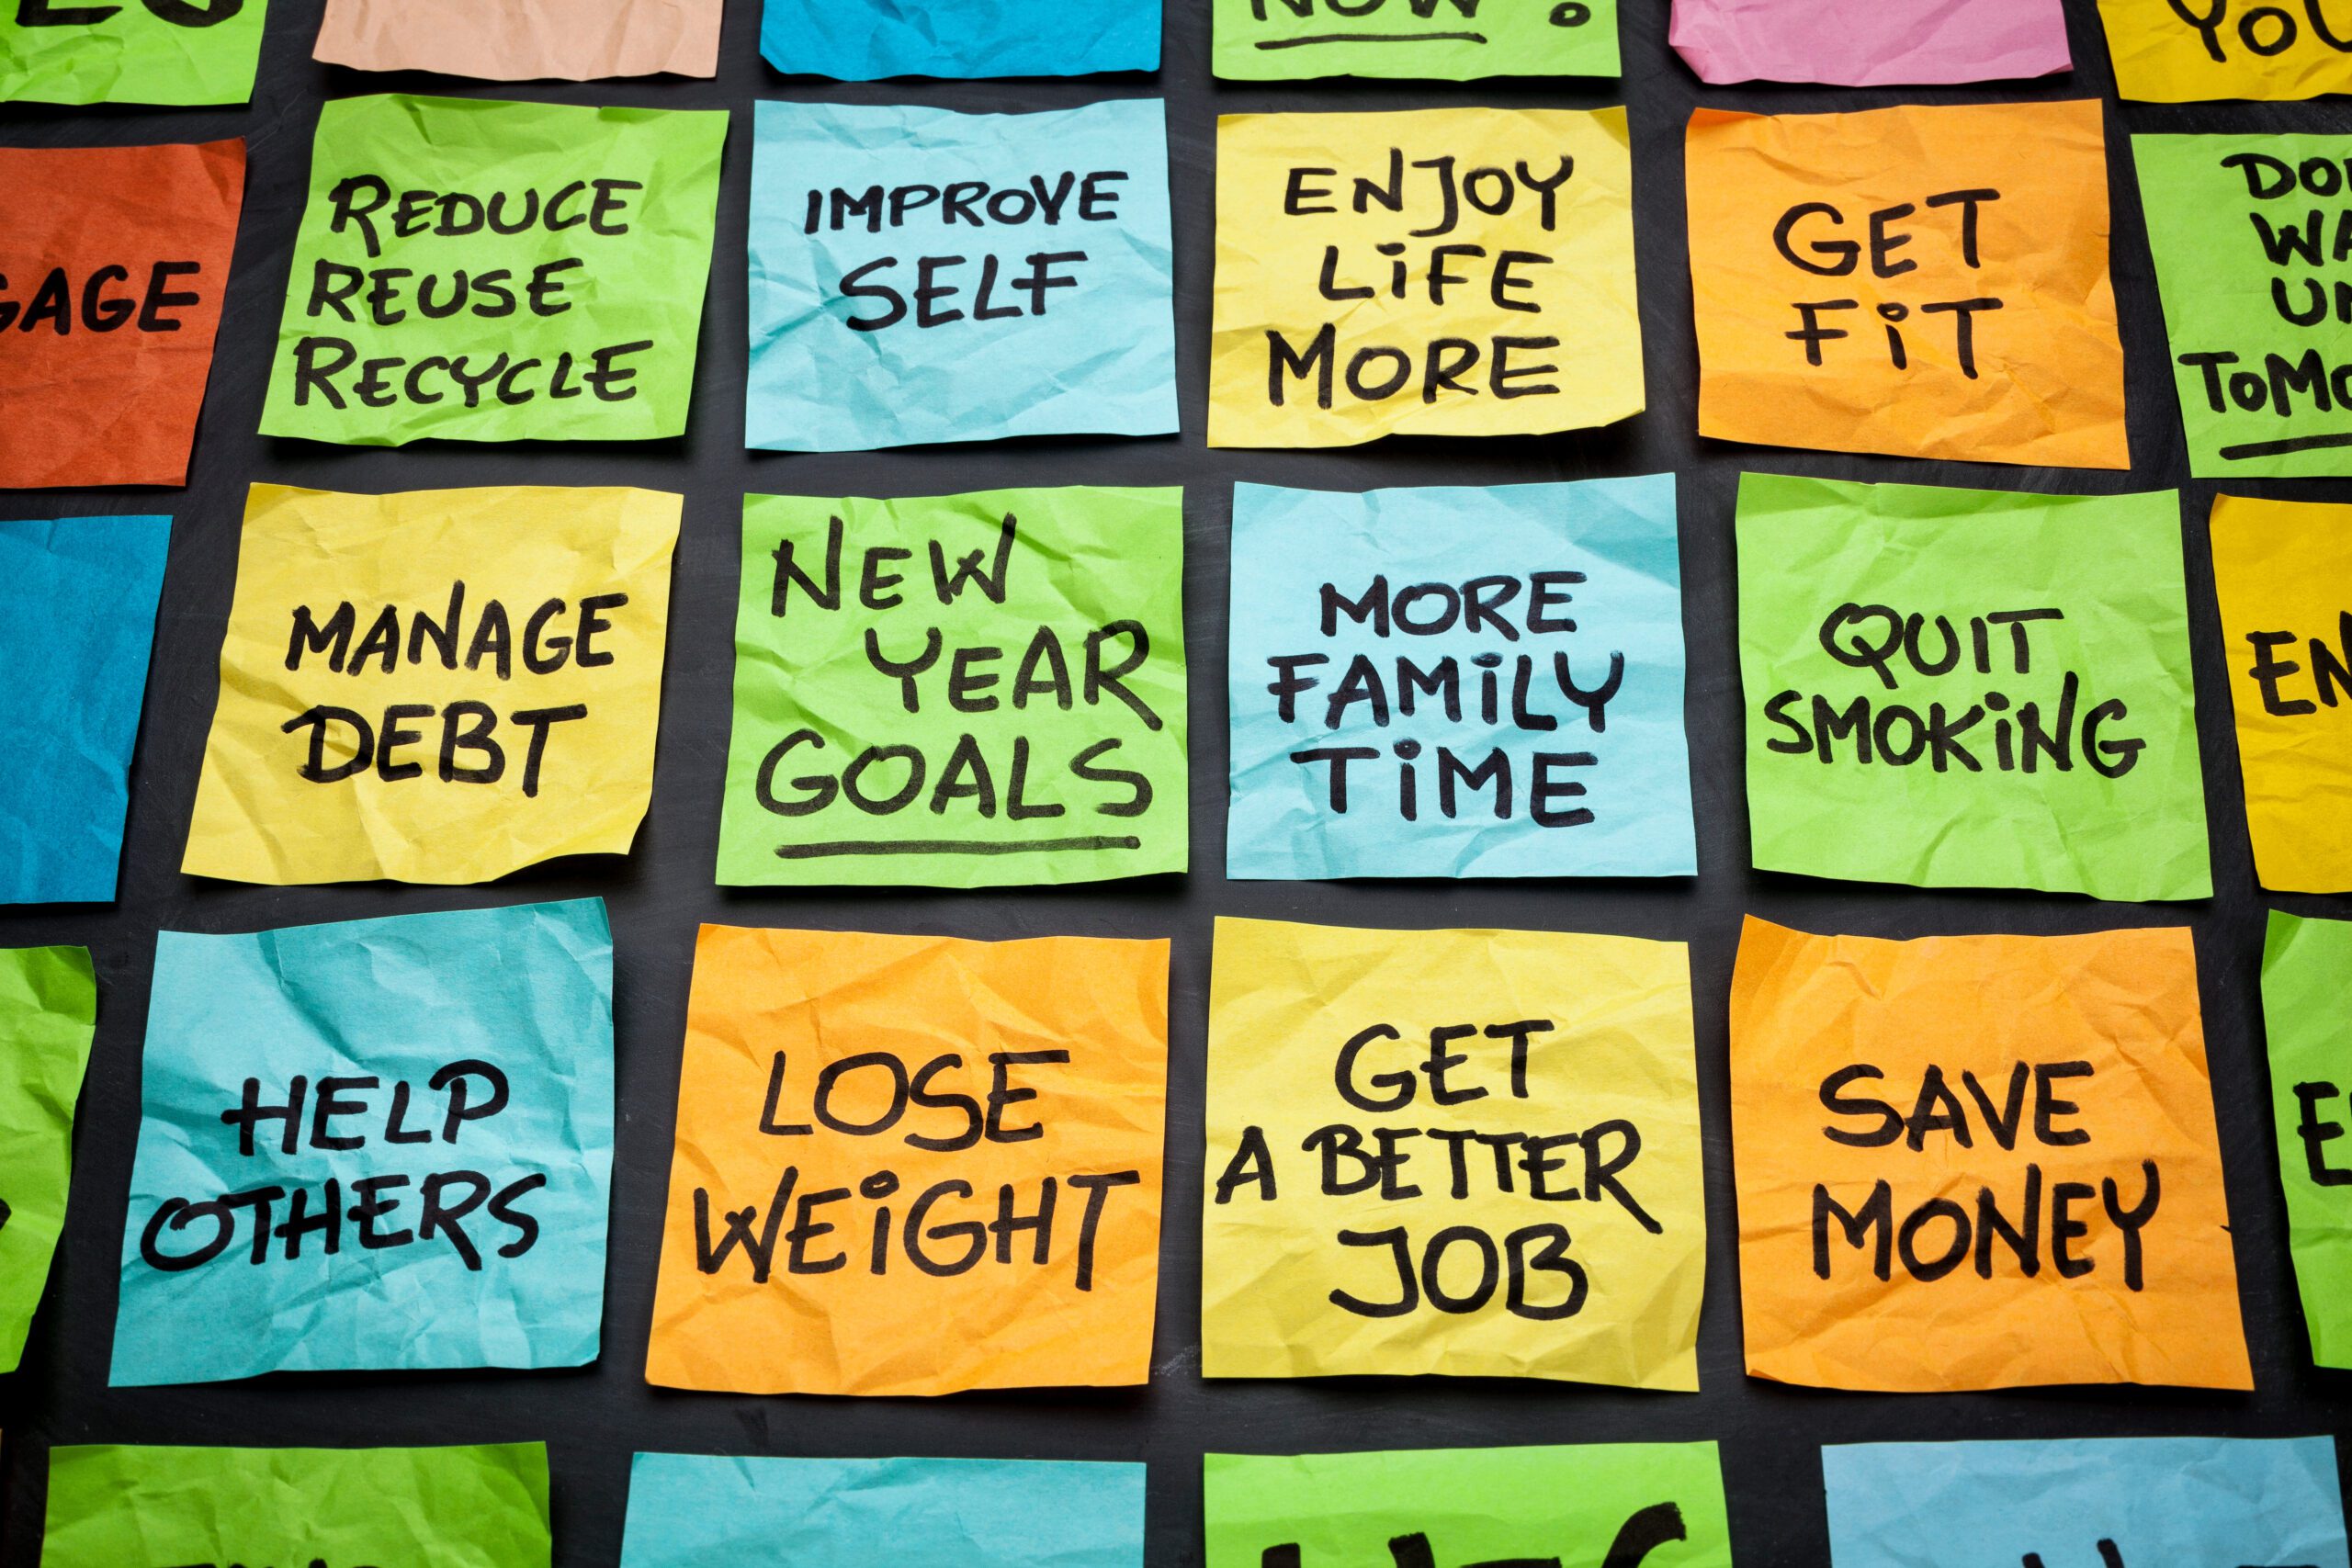 Help Your Members Keep Their Financial New Year’s Resolutions